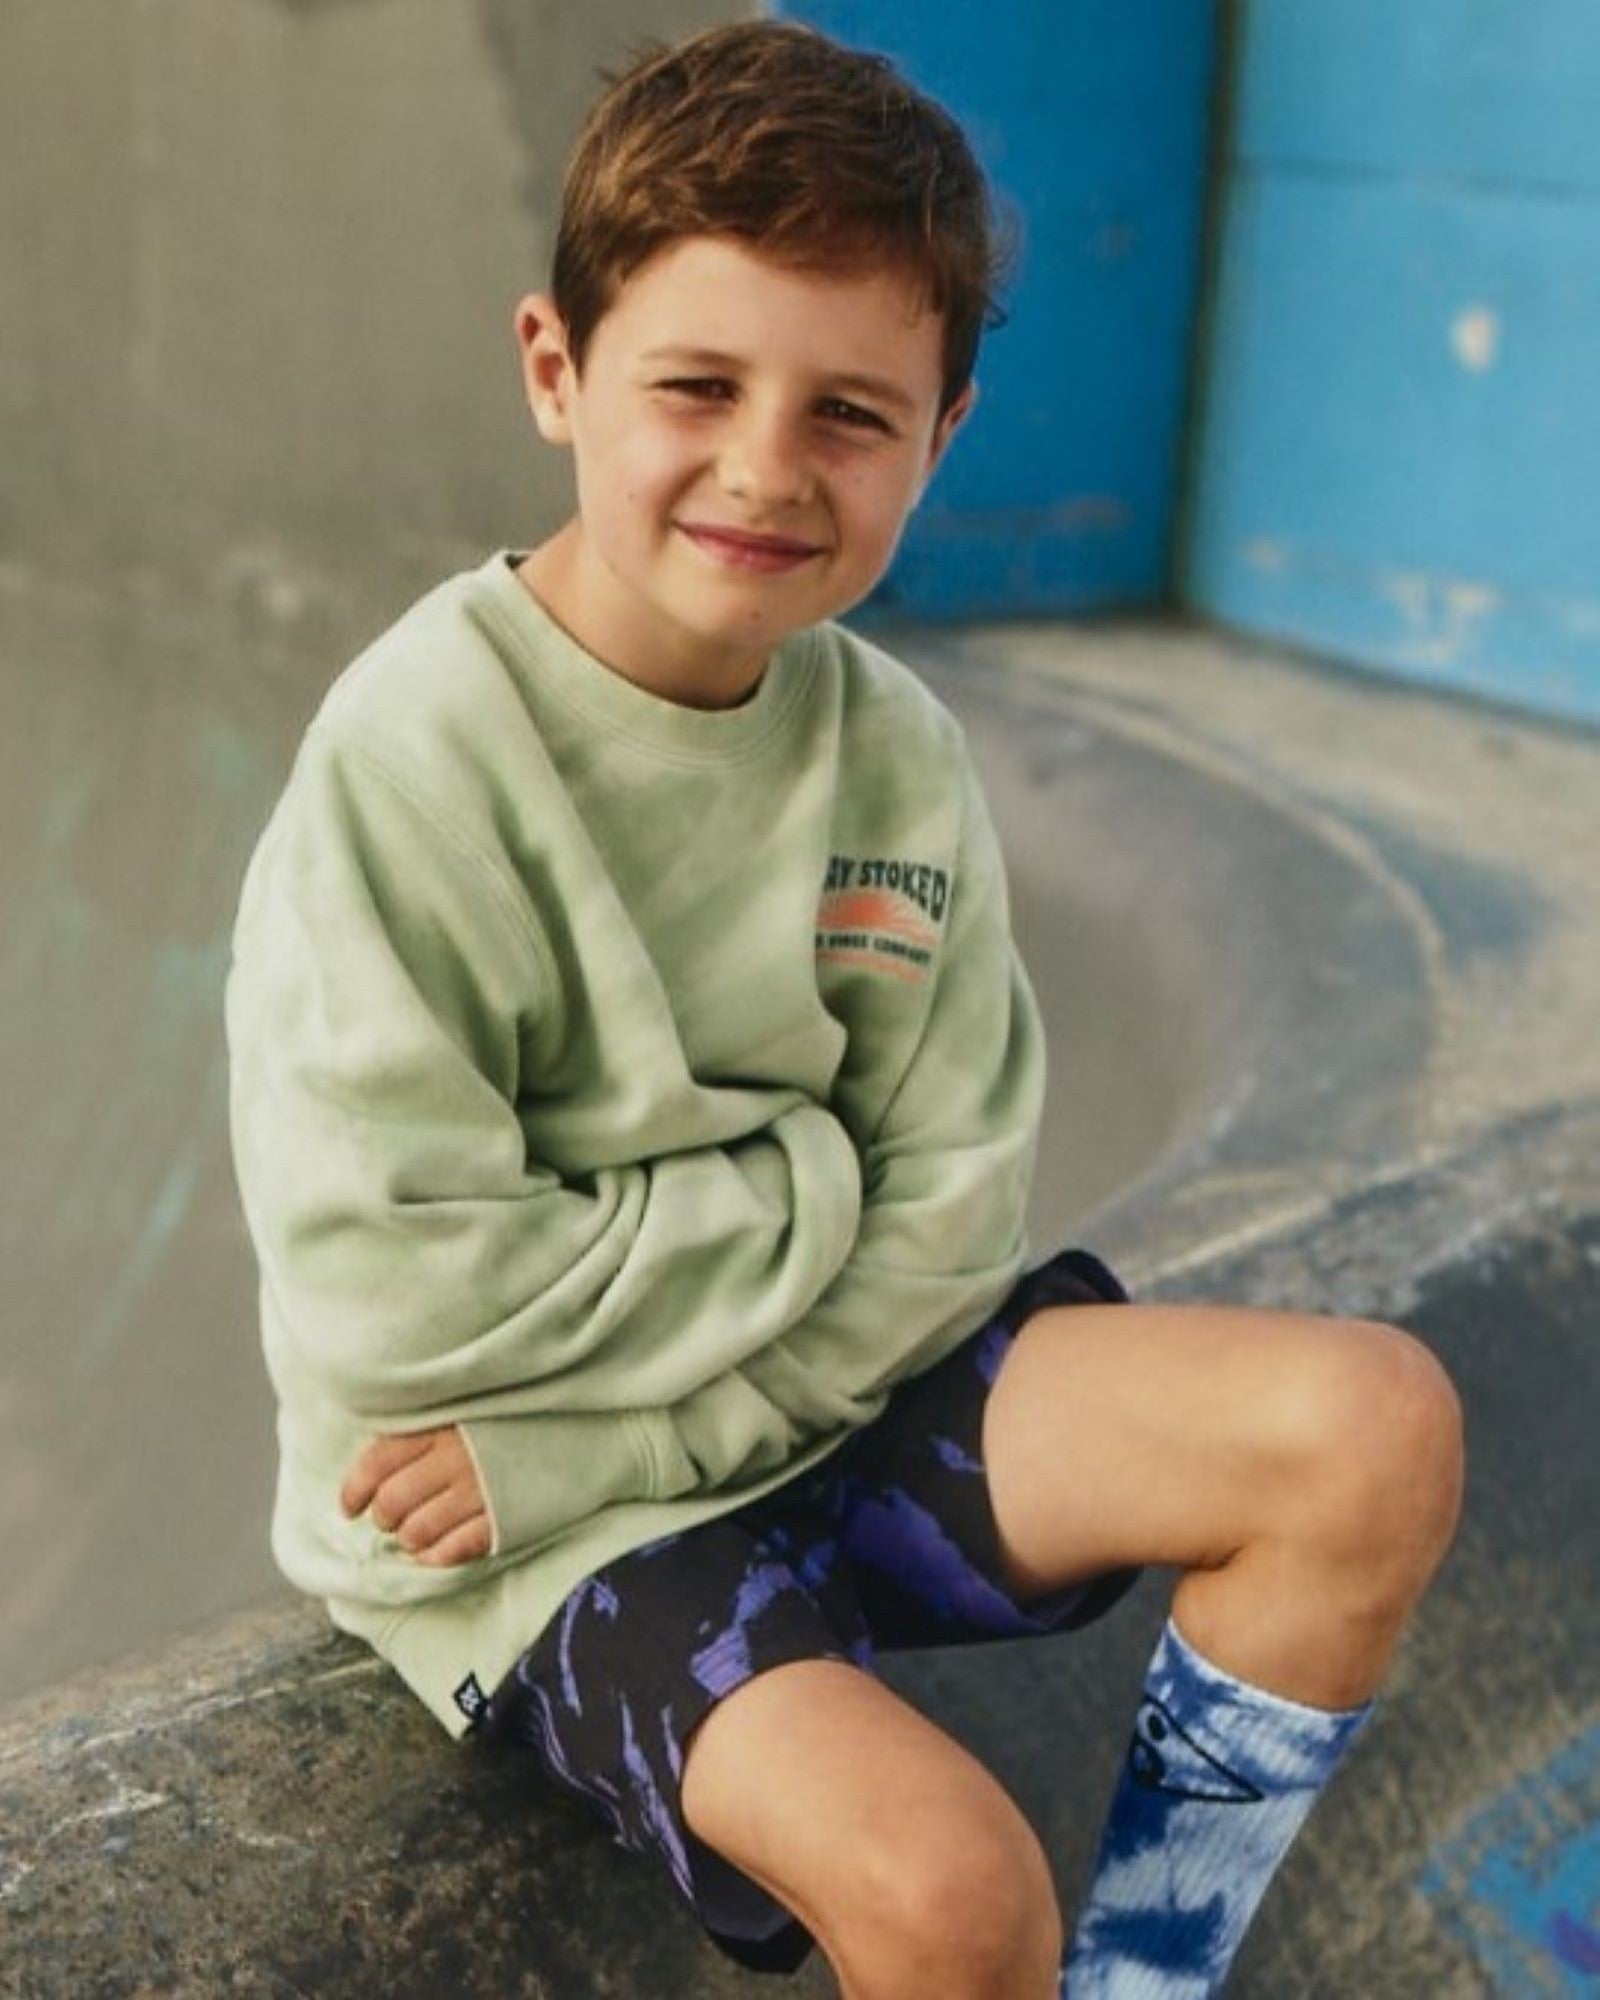 Alphabet Soup's Teen Camo Crew in Thyme Dye Camp print for boys aged 8-16. Featuring 100% Cotton French Terry, heavy fabric weight for comfort. Regular fit, straight hemline, ribbed crew neckline, thumbholes in cuffs. Tie dye with print to chest and back.